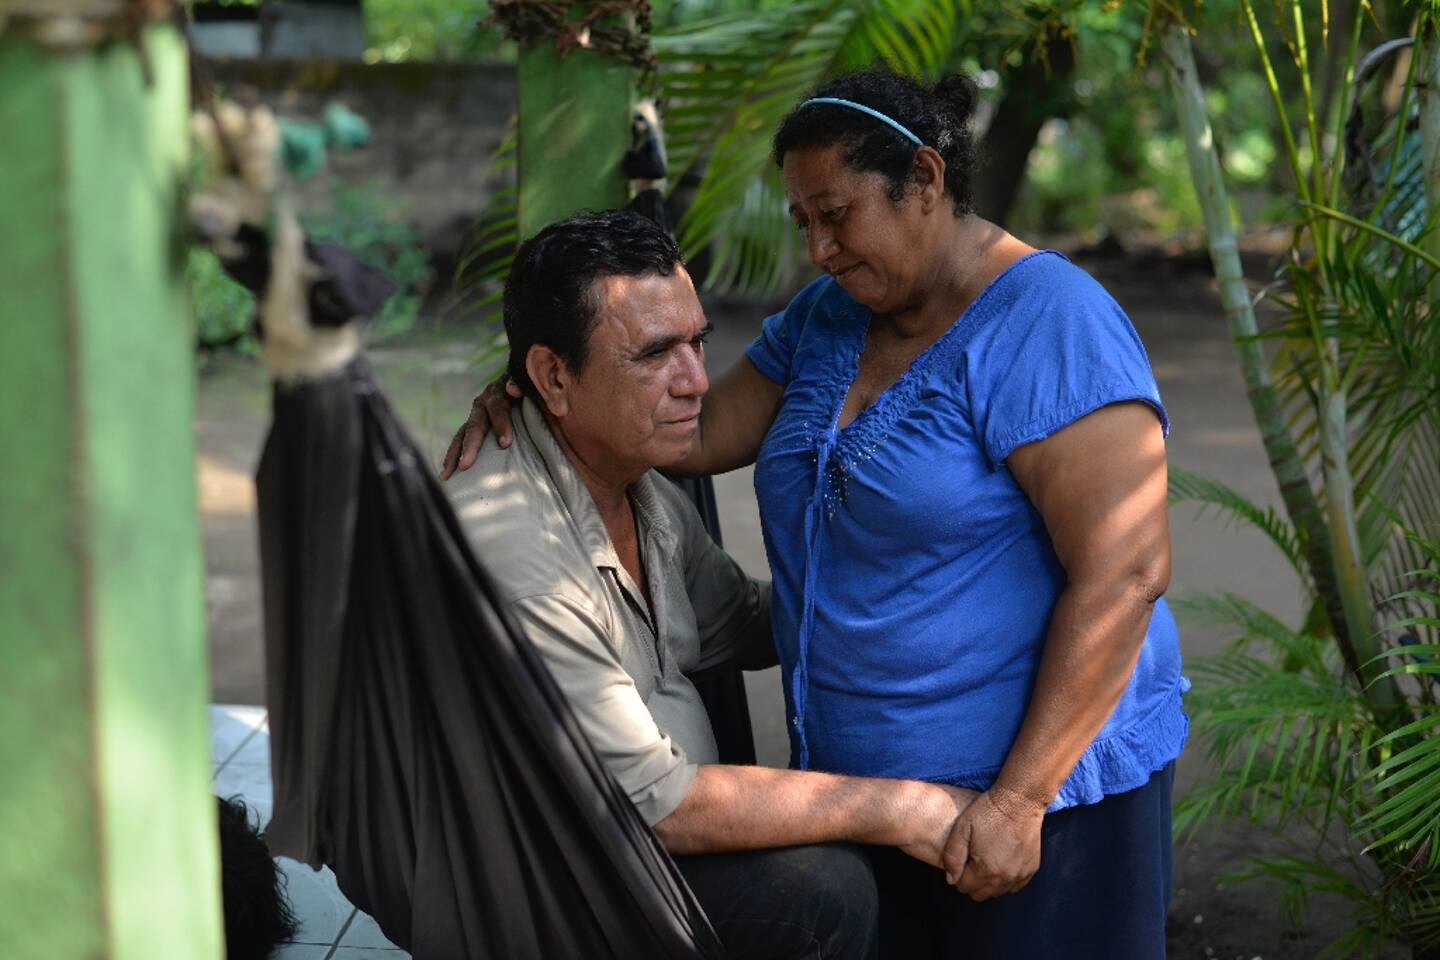 Luis Gomez, a former agricultural worker who was disinfected, and his wife, Idalia Paz Chinandega, in Nicaragua on May 11, 2022.